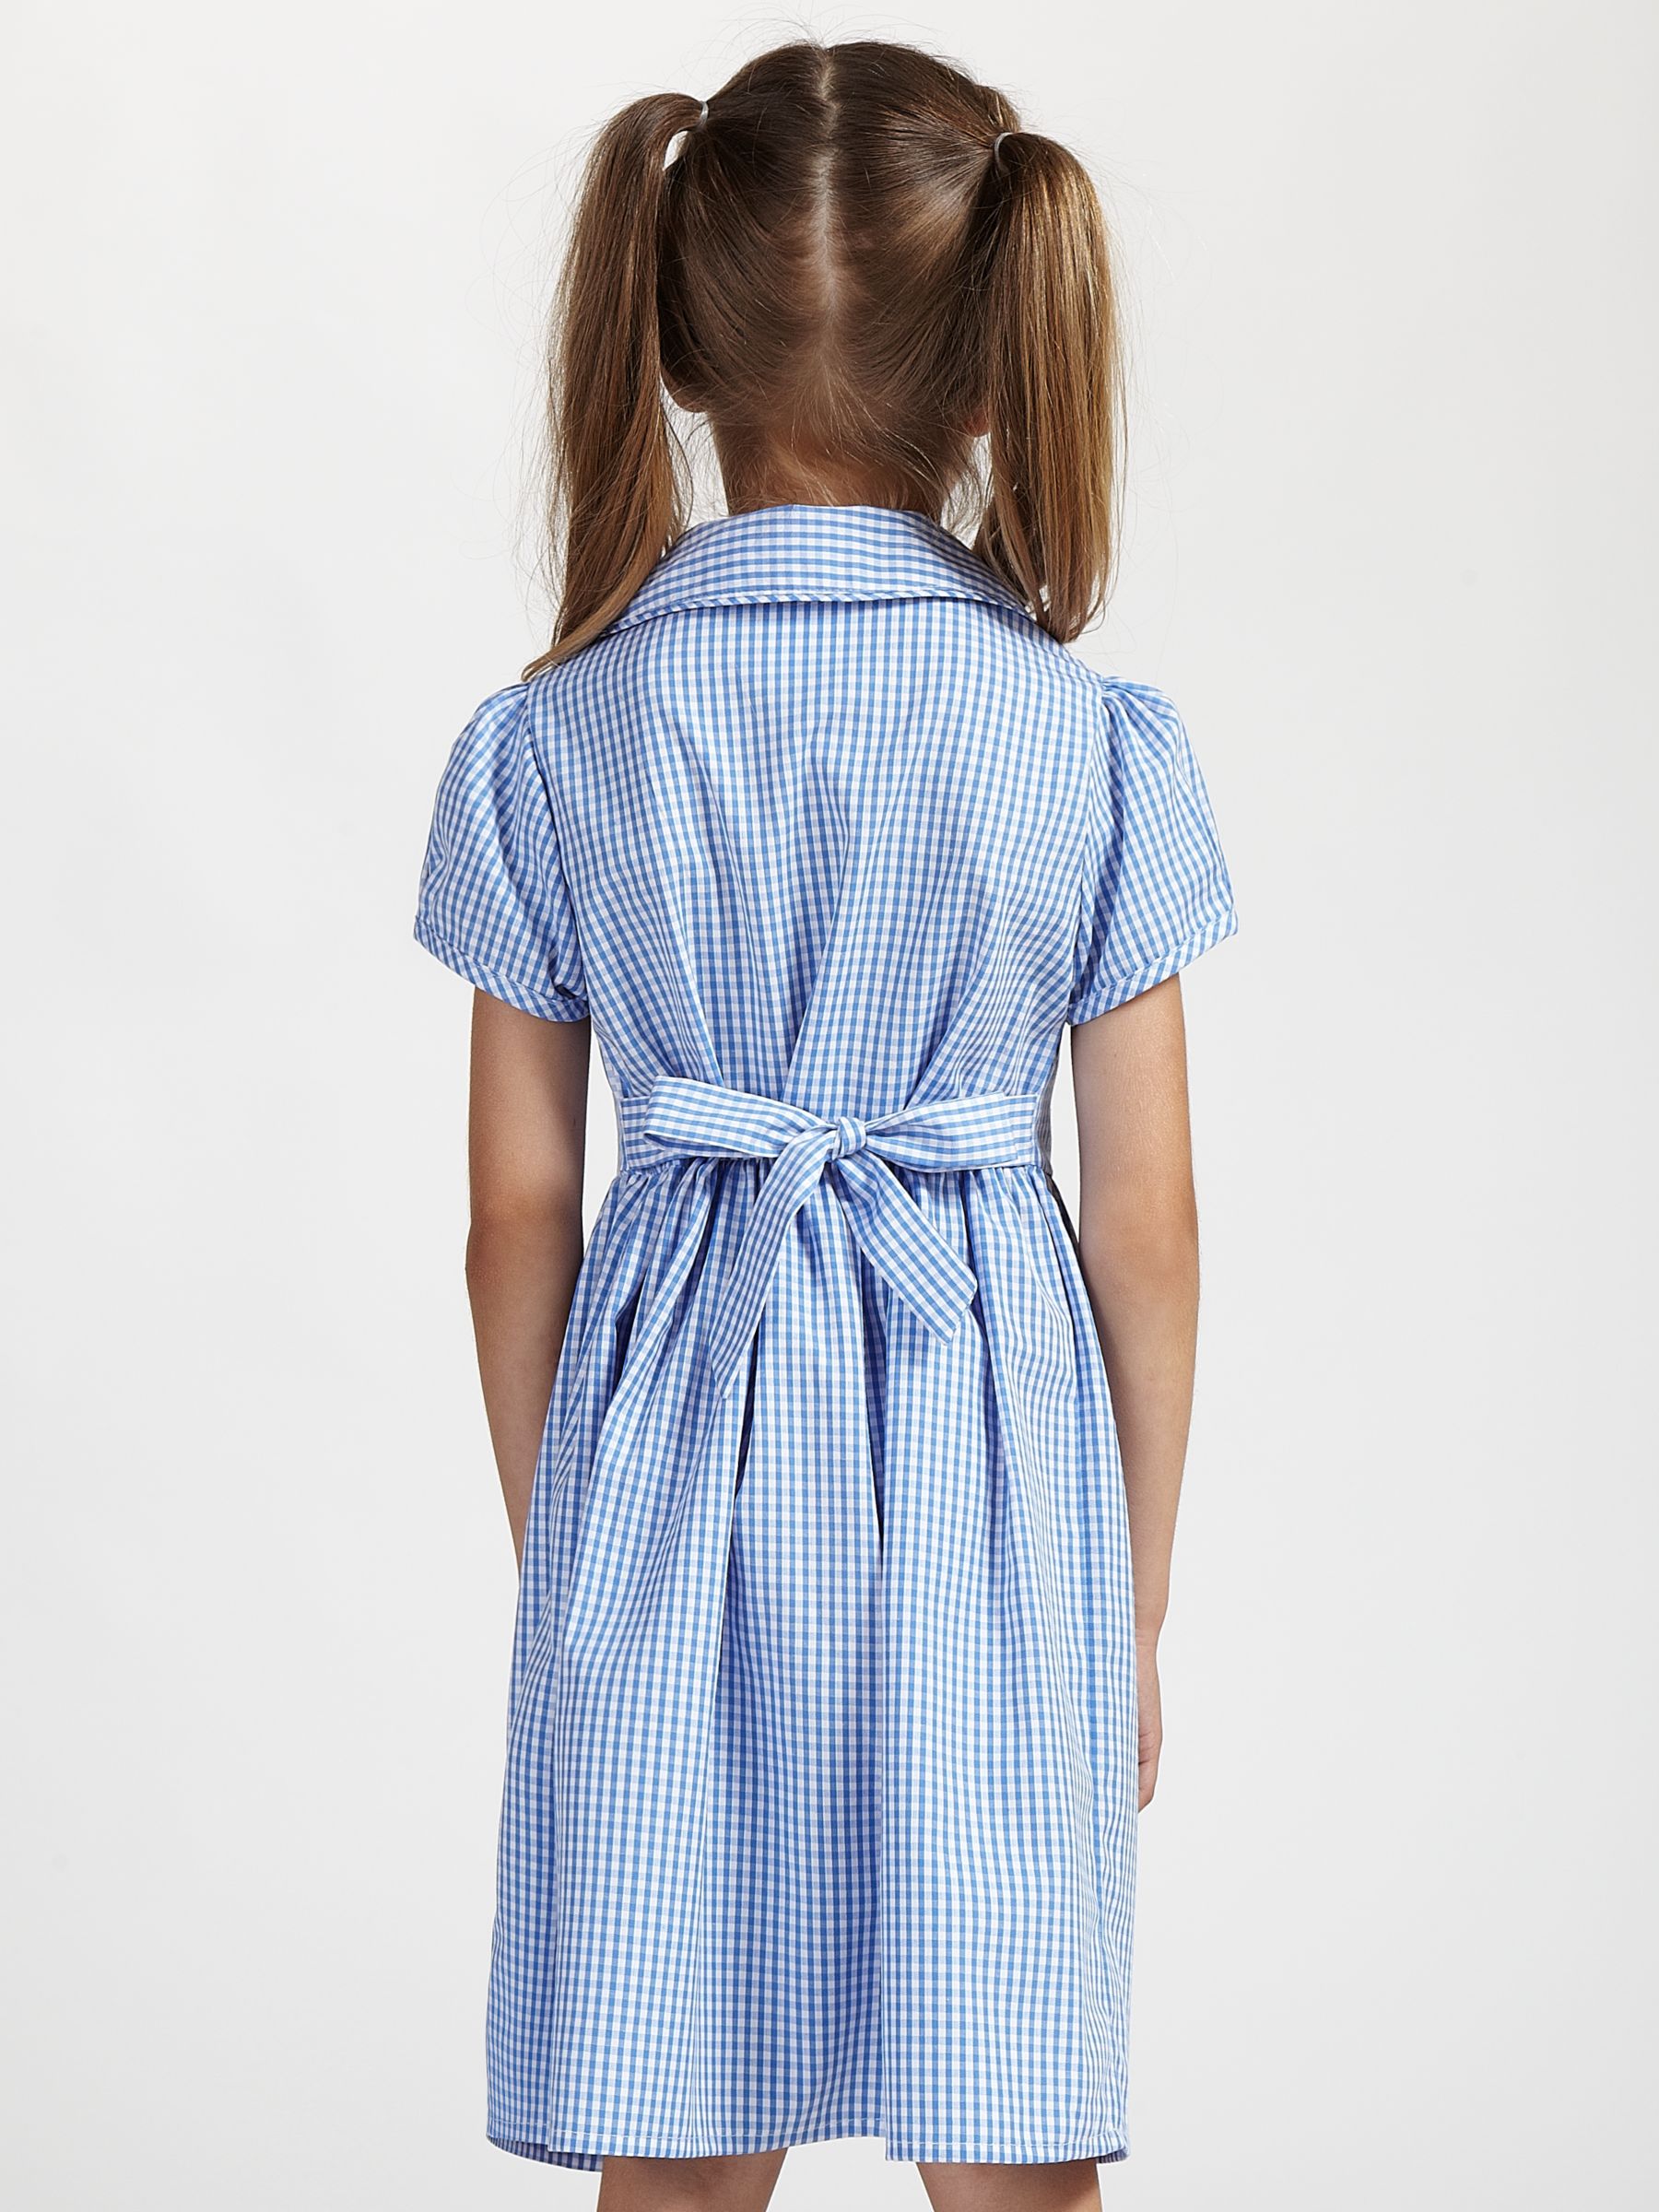 blue and white gingham school dress